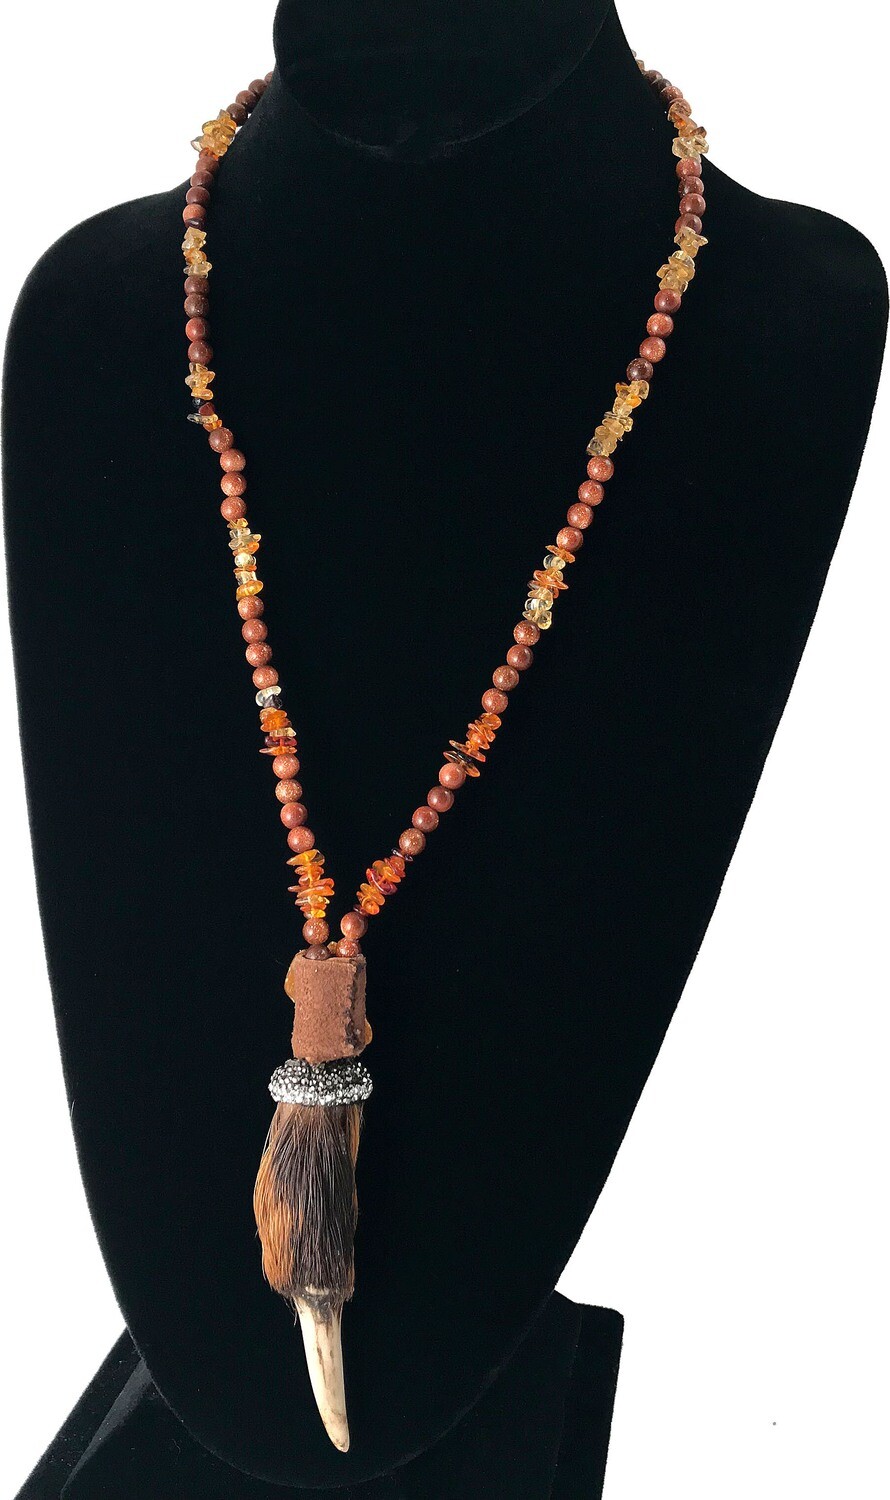 Amber Necklace with Bear Claw pendant